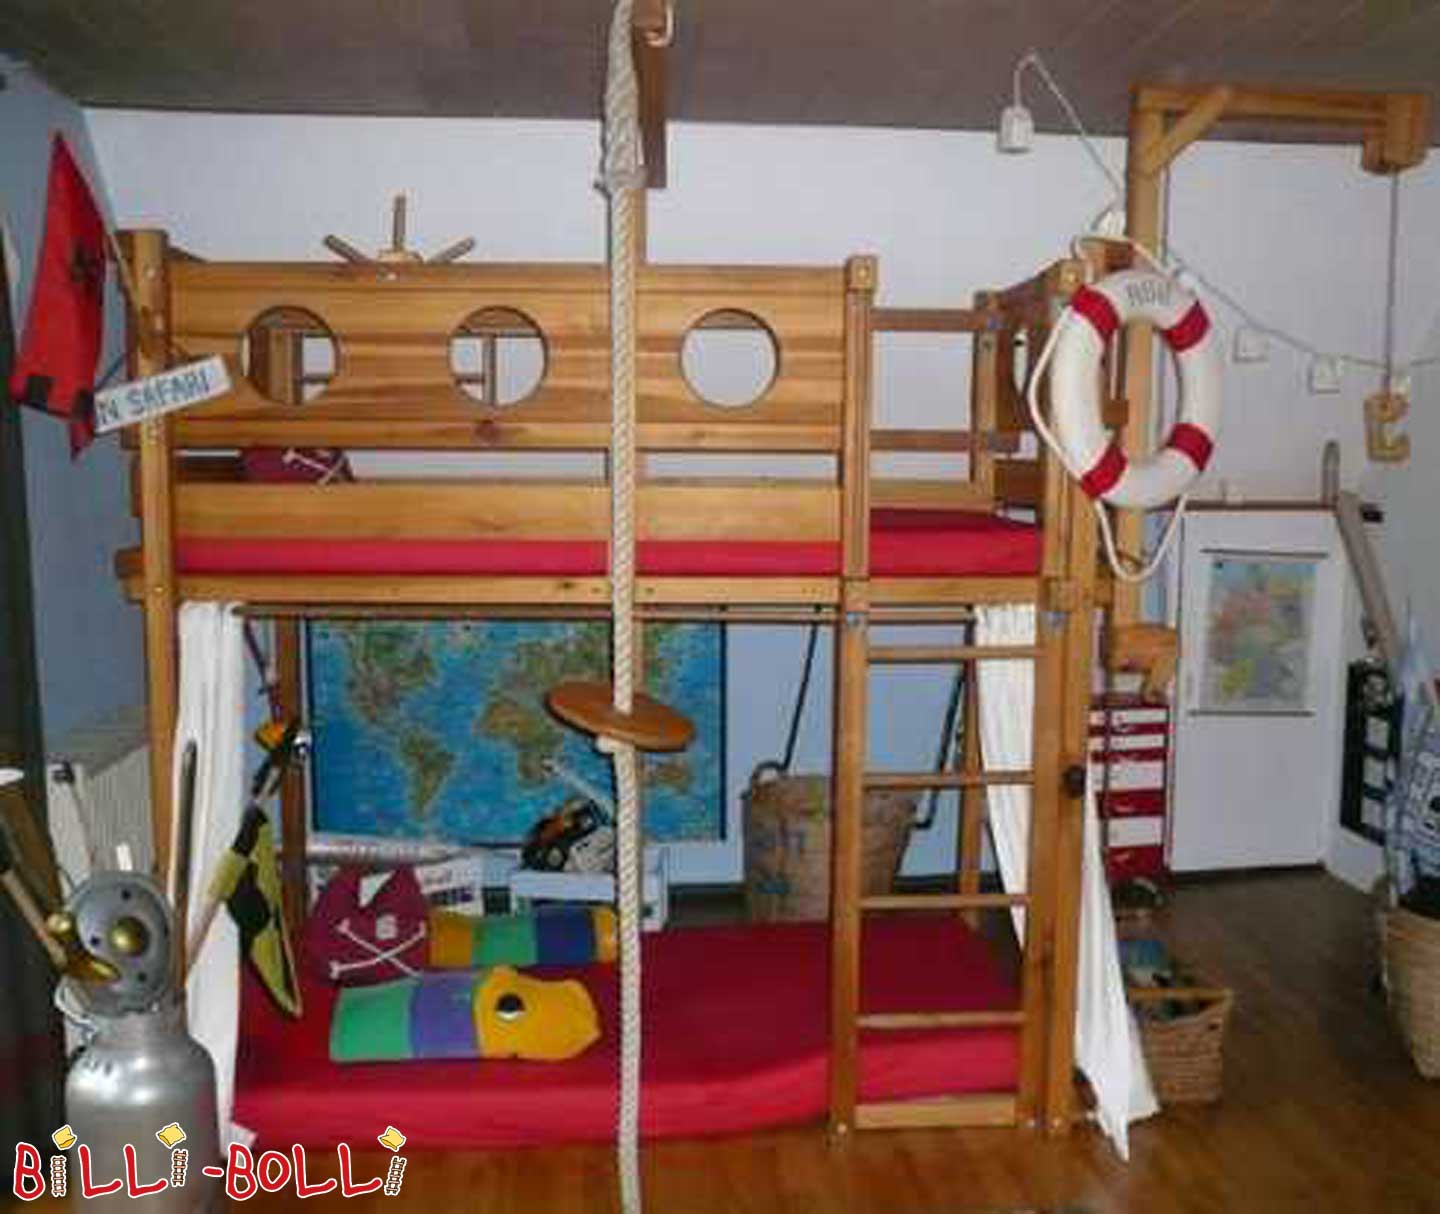 Billi-Bolli Pirate Bed (Category: second hand loft bed)